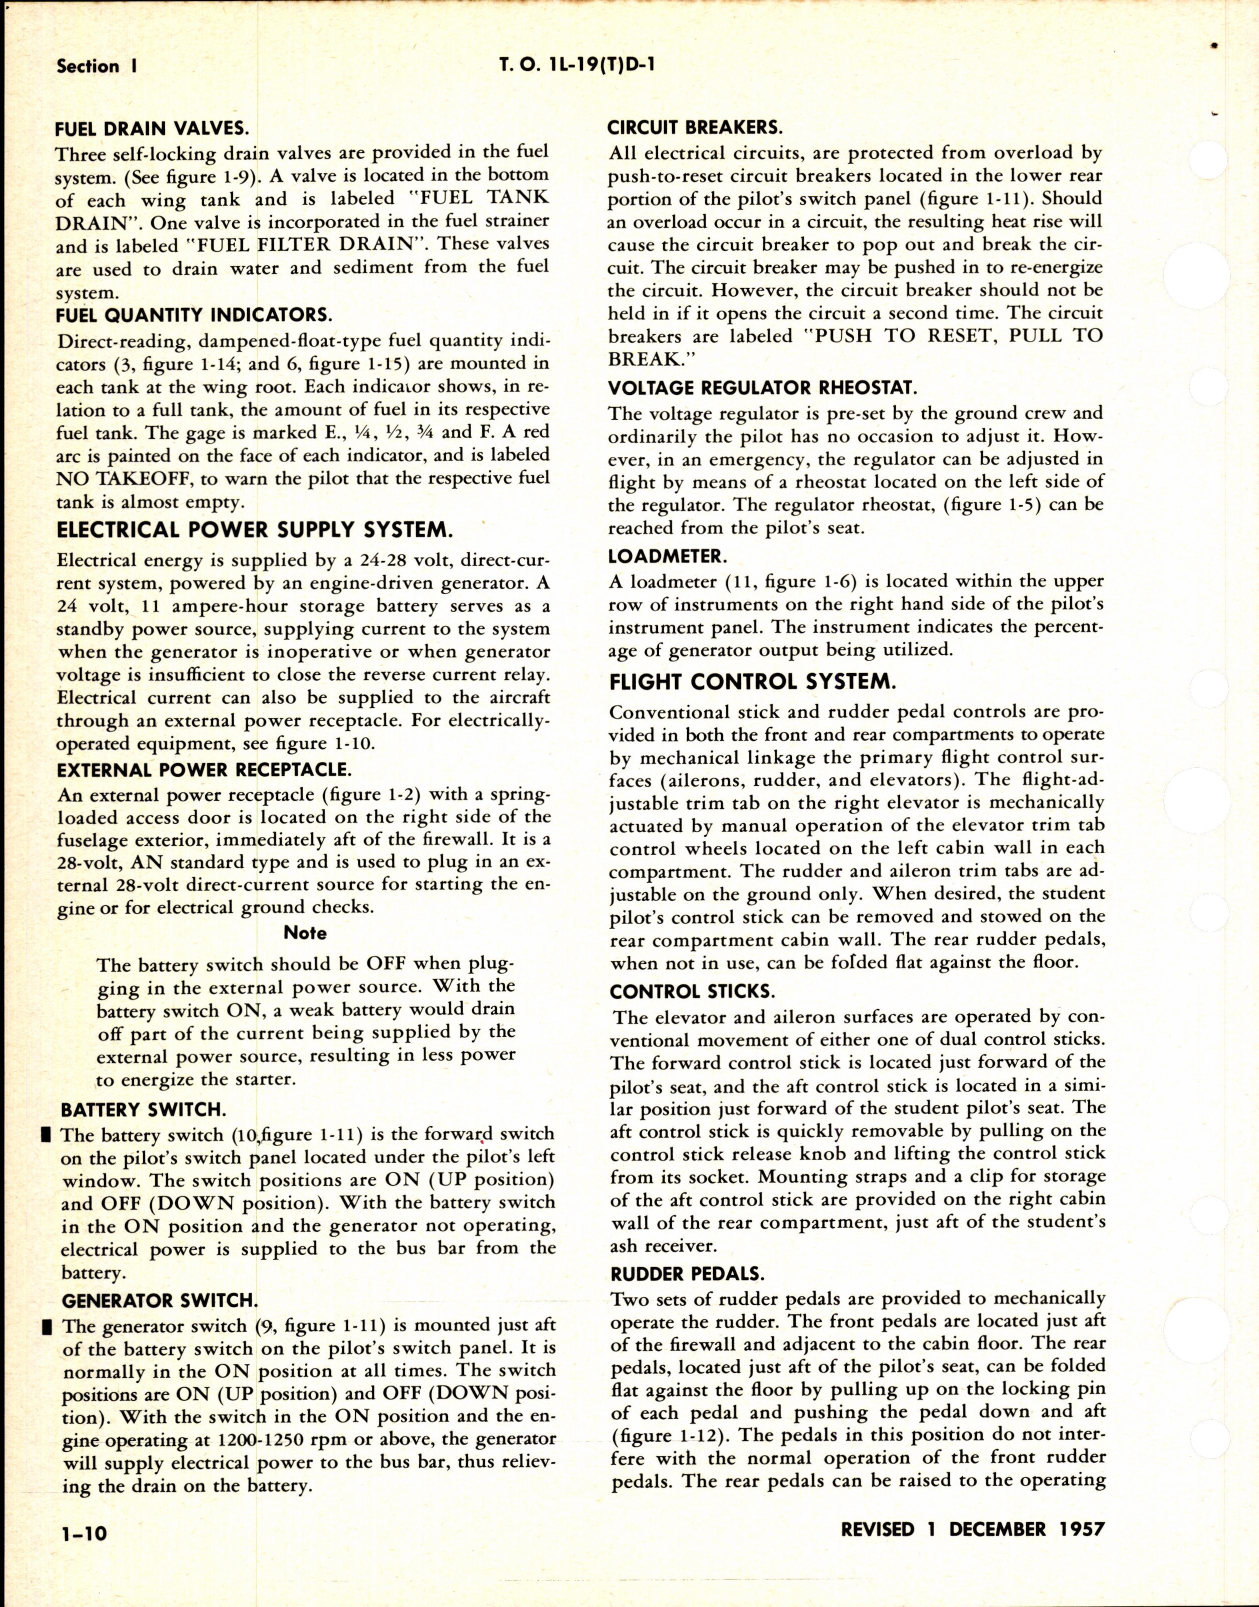 Sample page 8 from AirCorps Library document: Flight Handbook for TL-19D Aircraft